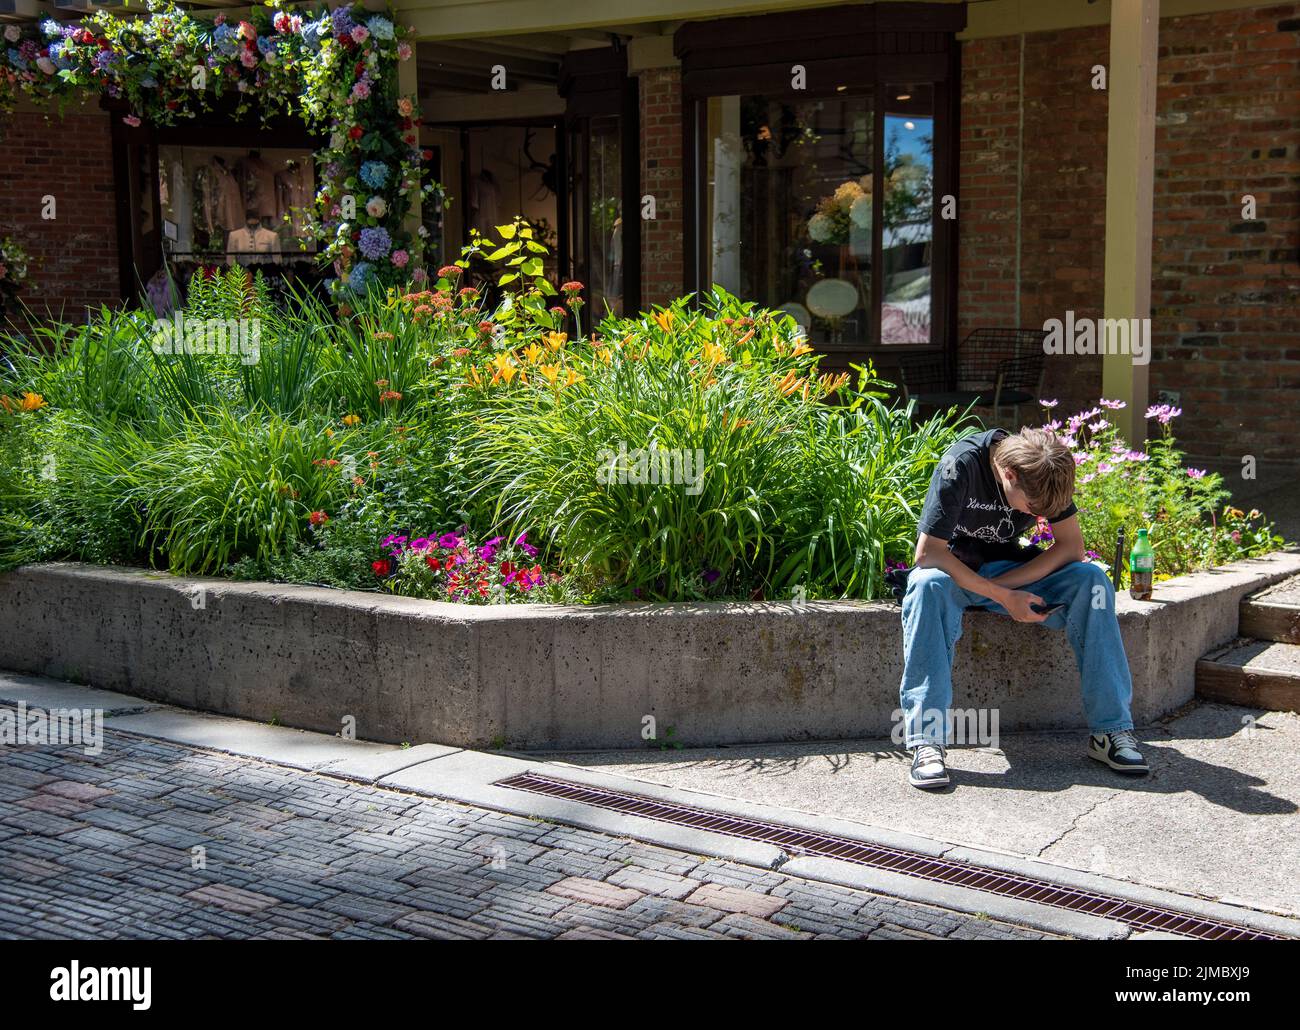 A young man hunched over his cell phone, sits on the edge of a planter filled with flowers in downtown Aspen, Colorado, United States. Stock Photo